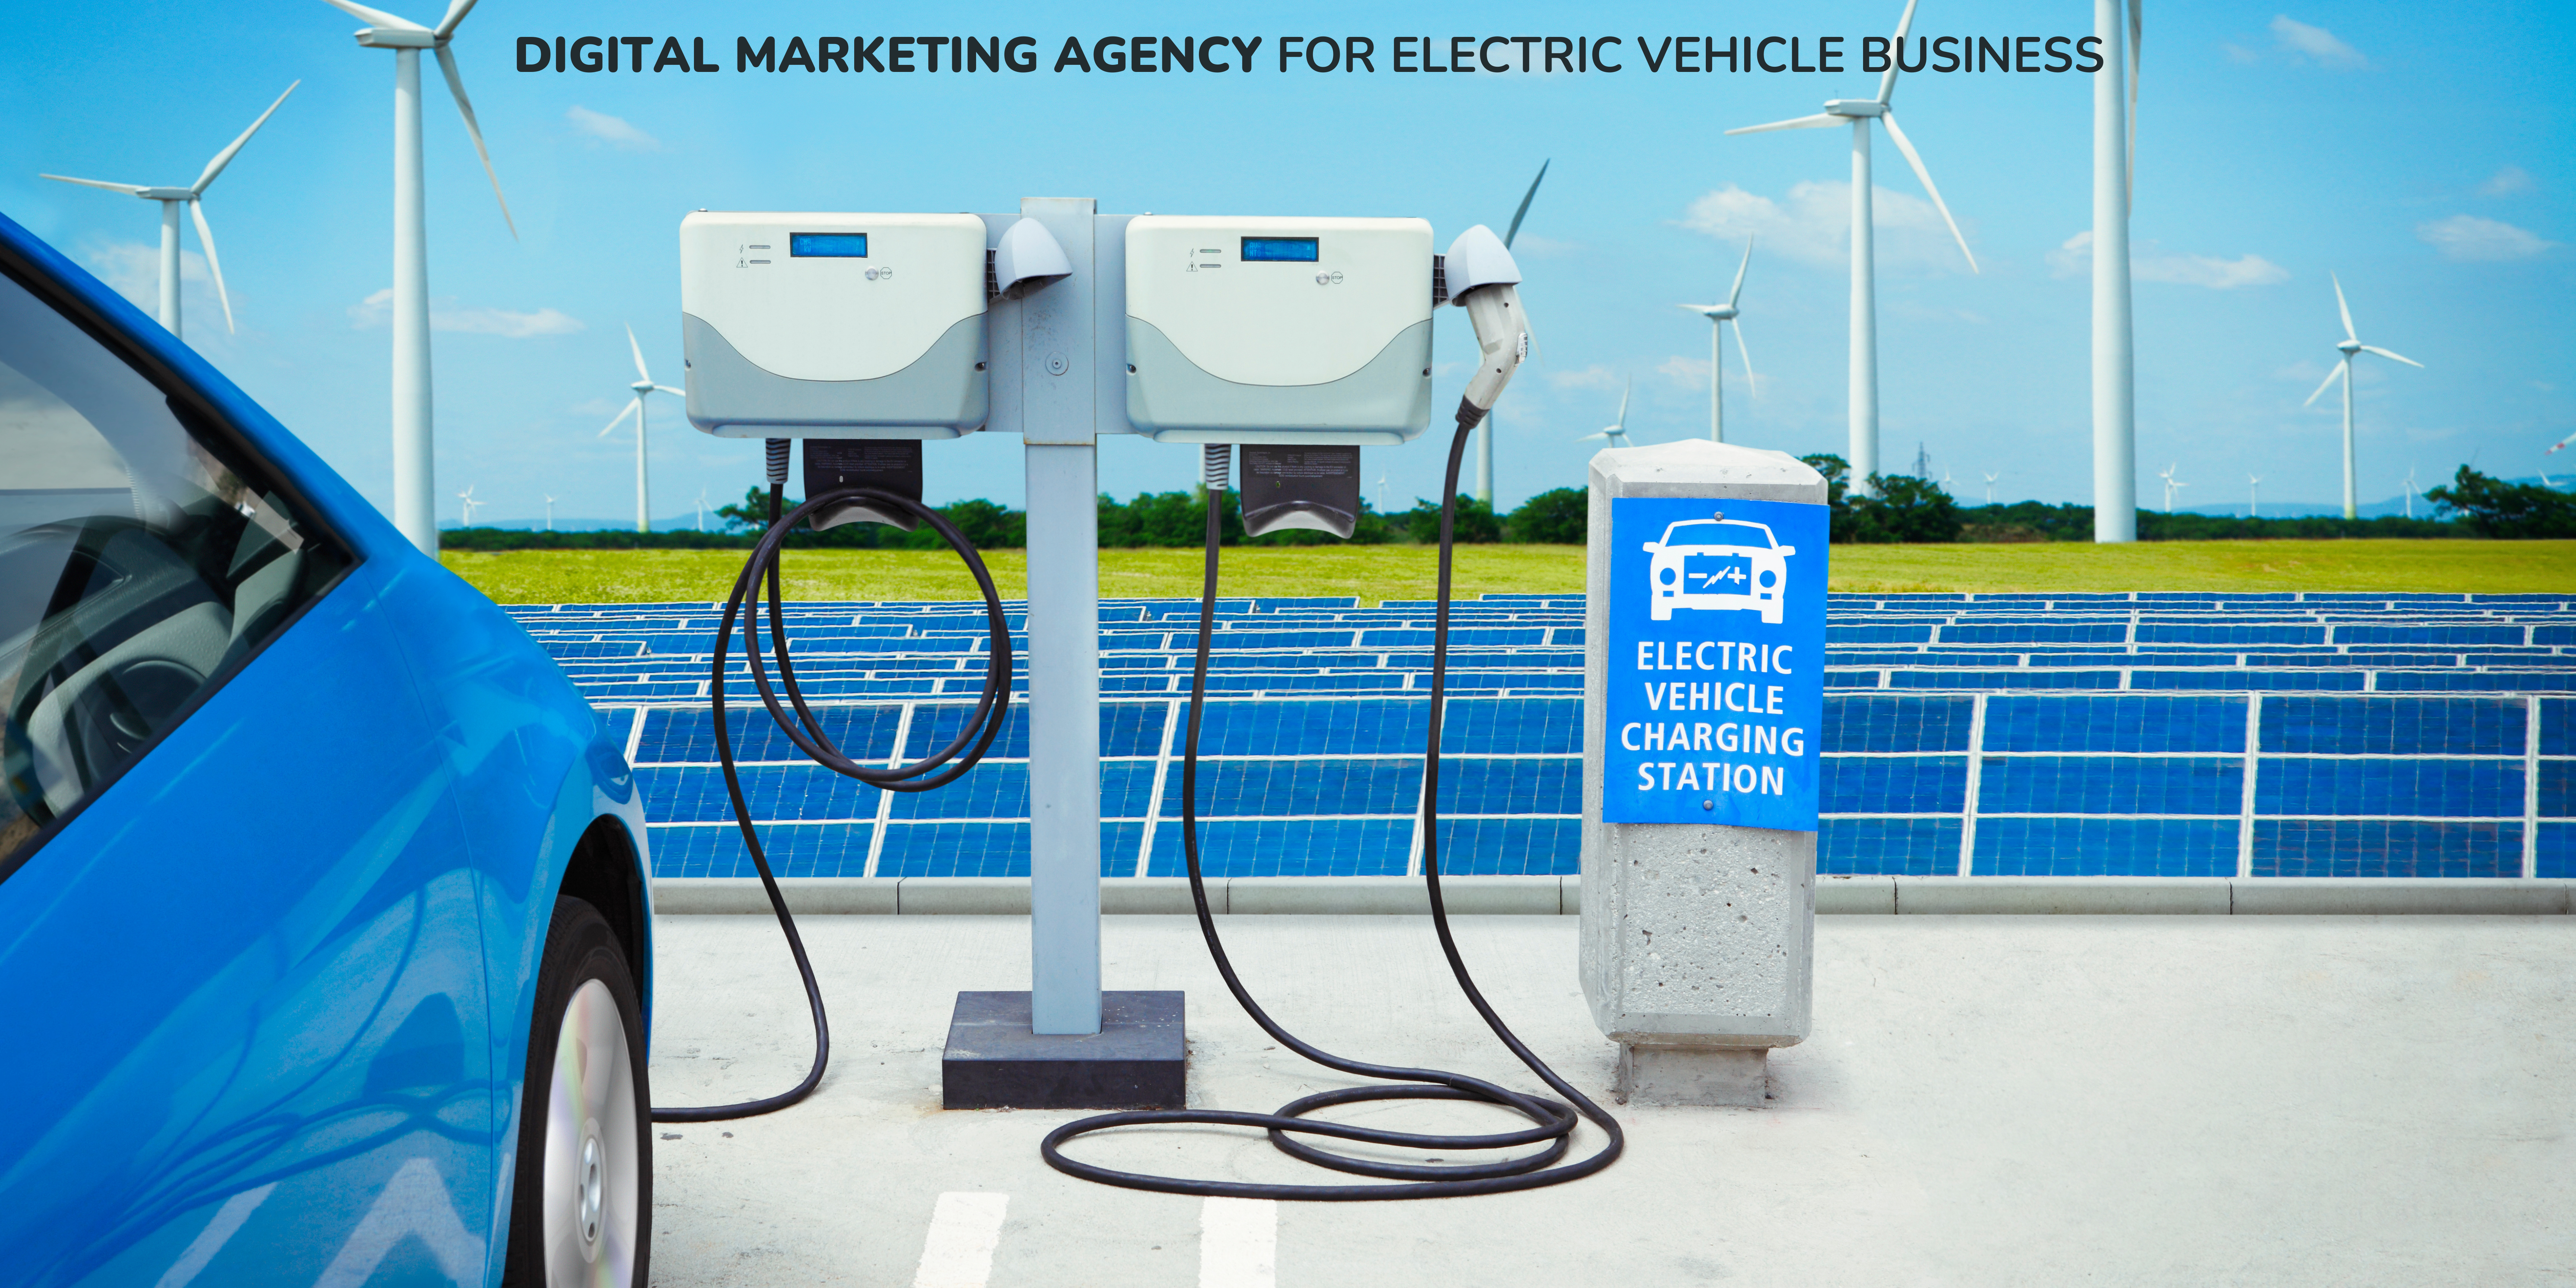 How To Make Your Product Stand Out With DIGITAL MARKETING AGENCY FOR ELECTRIC VEHICLE BUSINESS